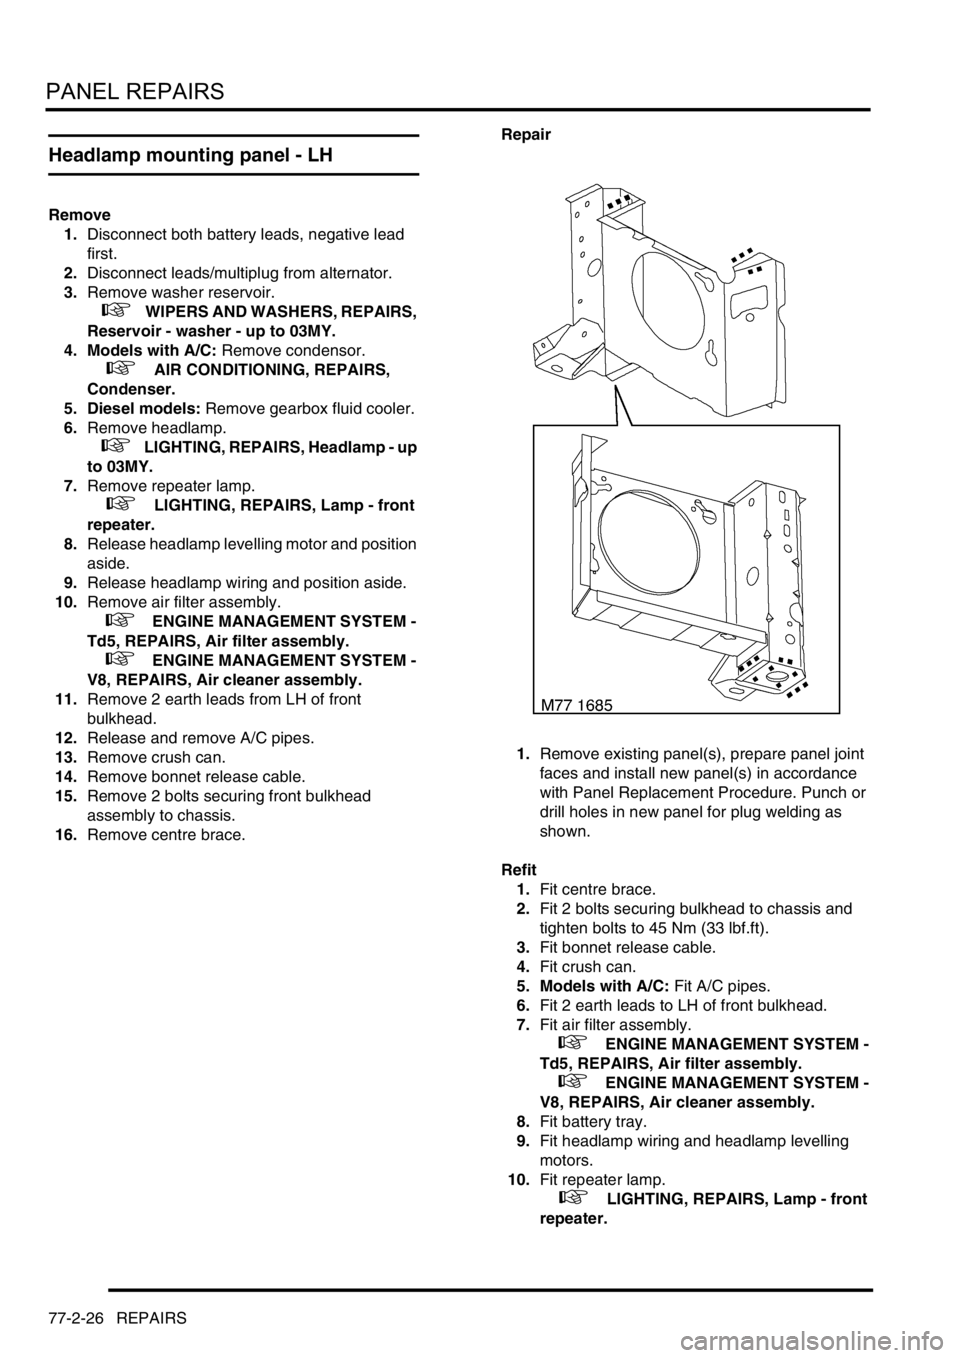 LAND ROVER DISCOVERY 2002  Workshop Manual PANEL REPAIRS
77-2-26 REPAIRS
Headlamp mounting panel - LH
Remove
1.Disconnect both battery leads, negative lead 
first.
2.Disconnect leads/multiplug from alternator. 
3.Remove washer reservoir.
 
 + 